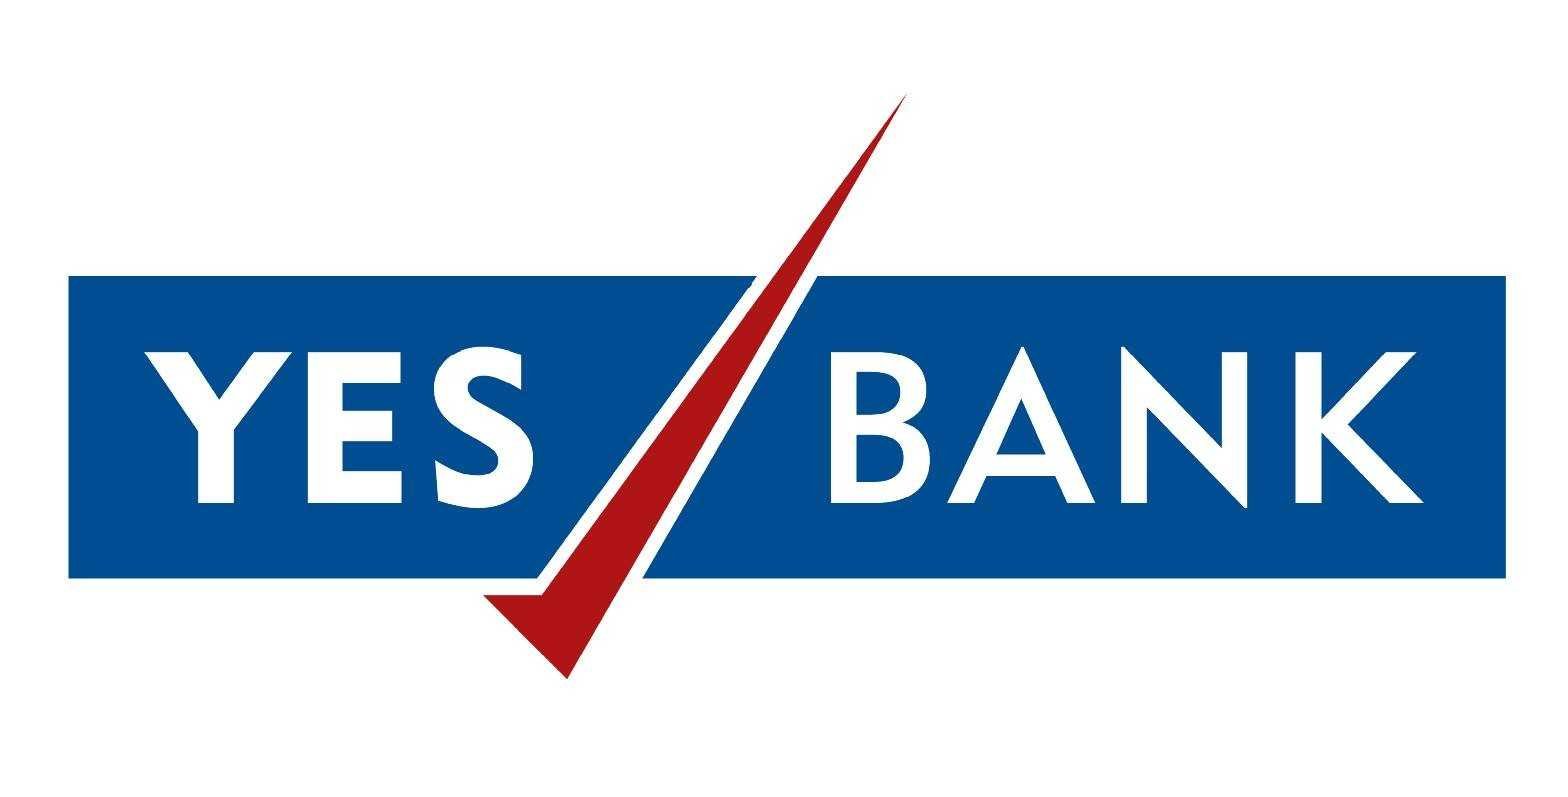 should i buy yes bank share now